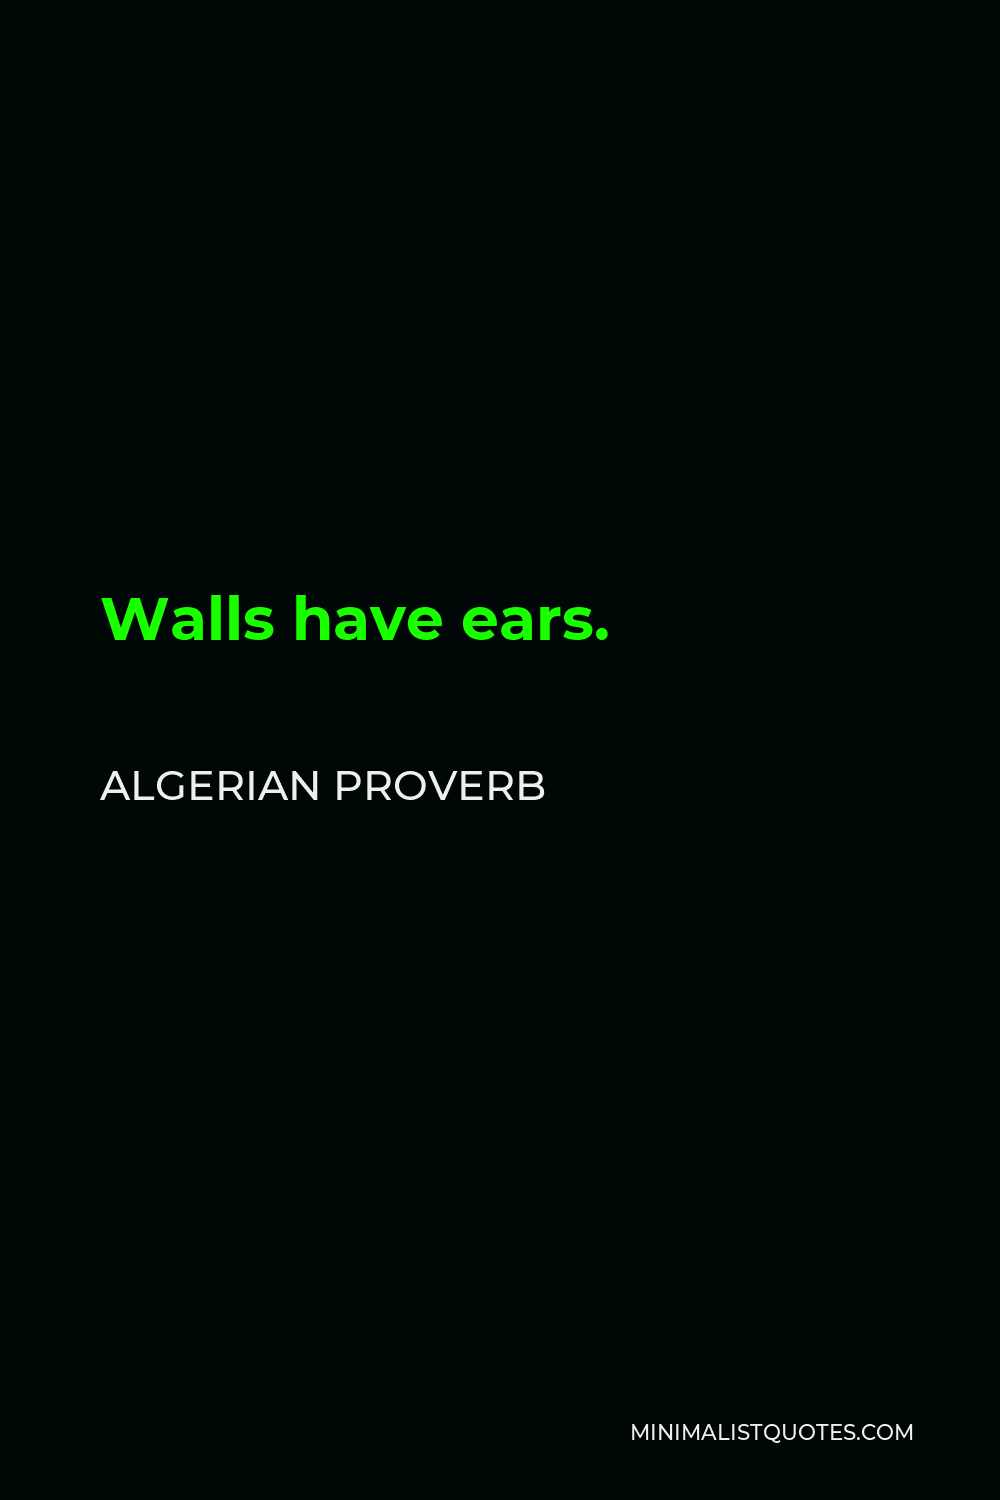 Algerian Proverb Quote - Walls have ears.